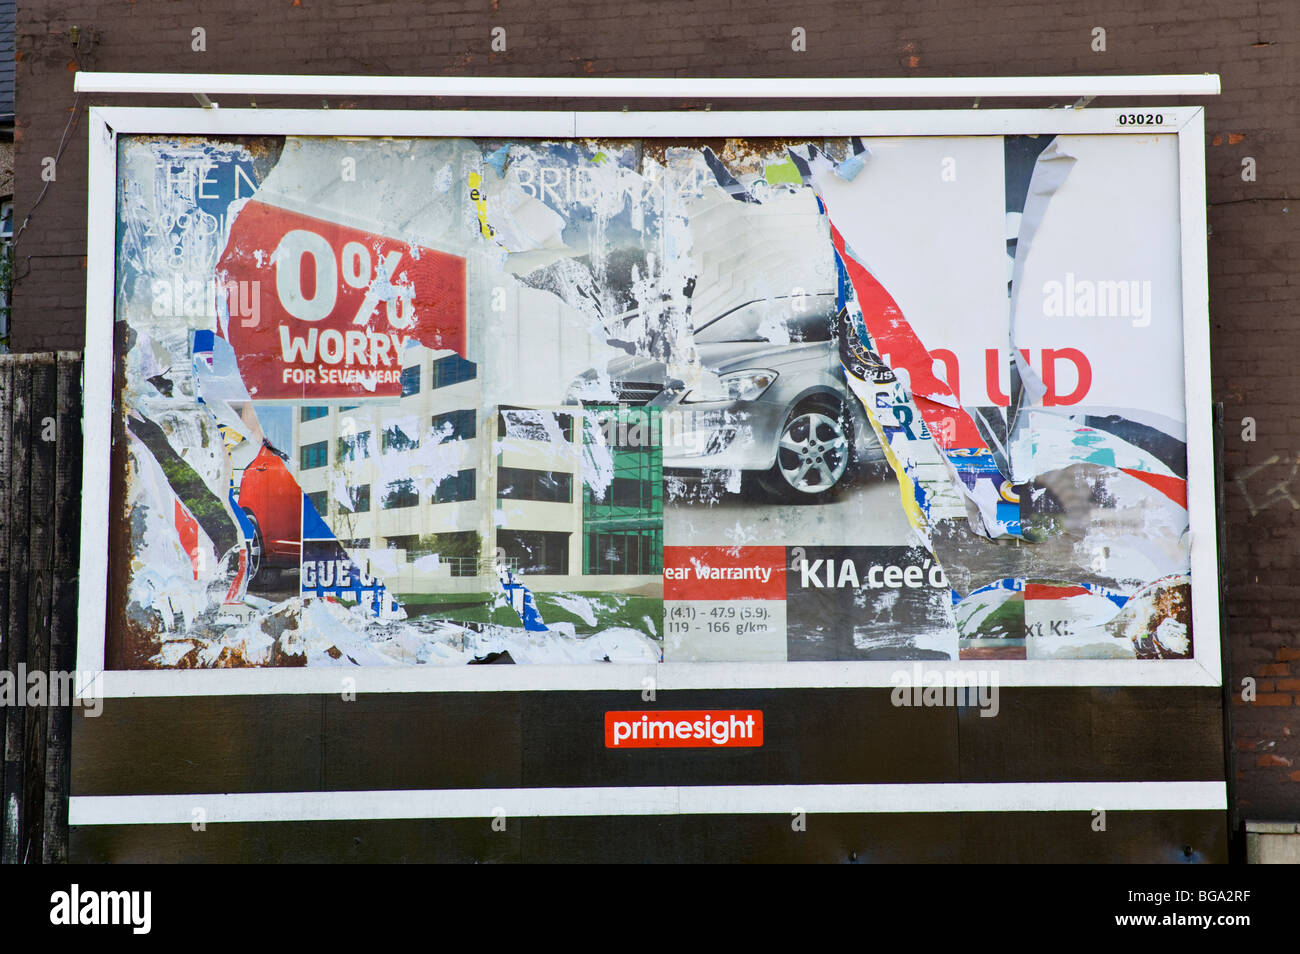 primesight billboard site with ripped and torn posters in Newport South Wales UK Stock Photo